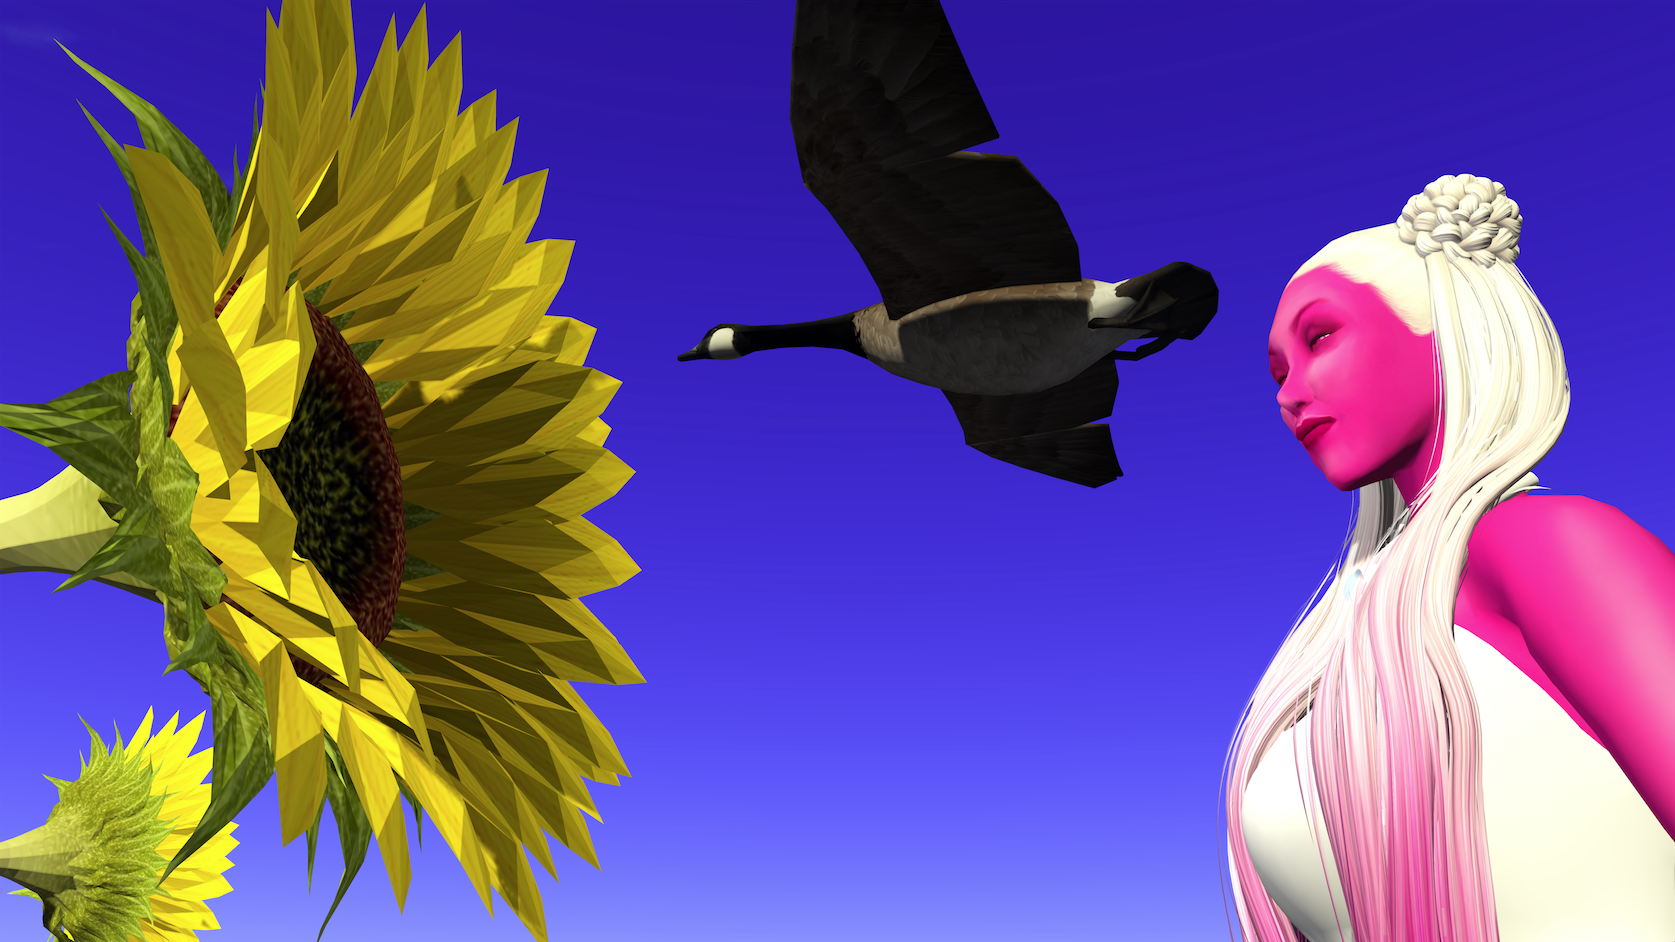 An image created in a virtual environment with a sunflower on the left, a goose in the middle, and a purple-skinned woman with white hair on the right